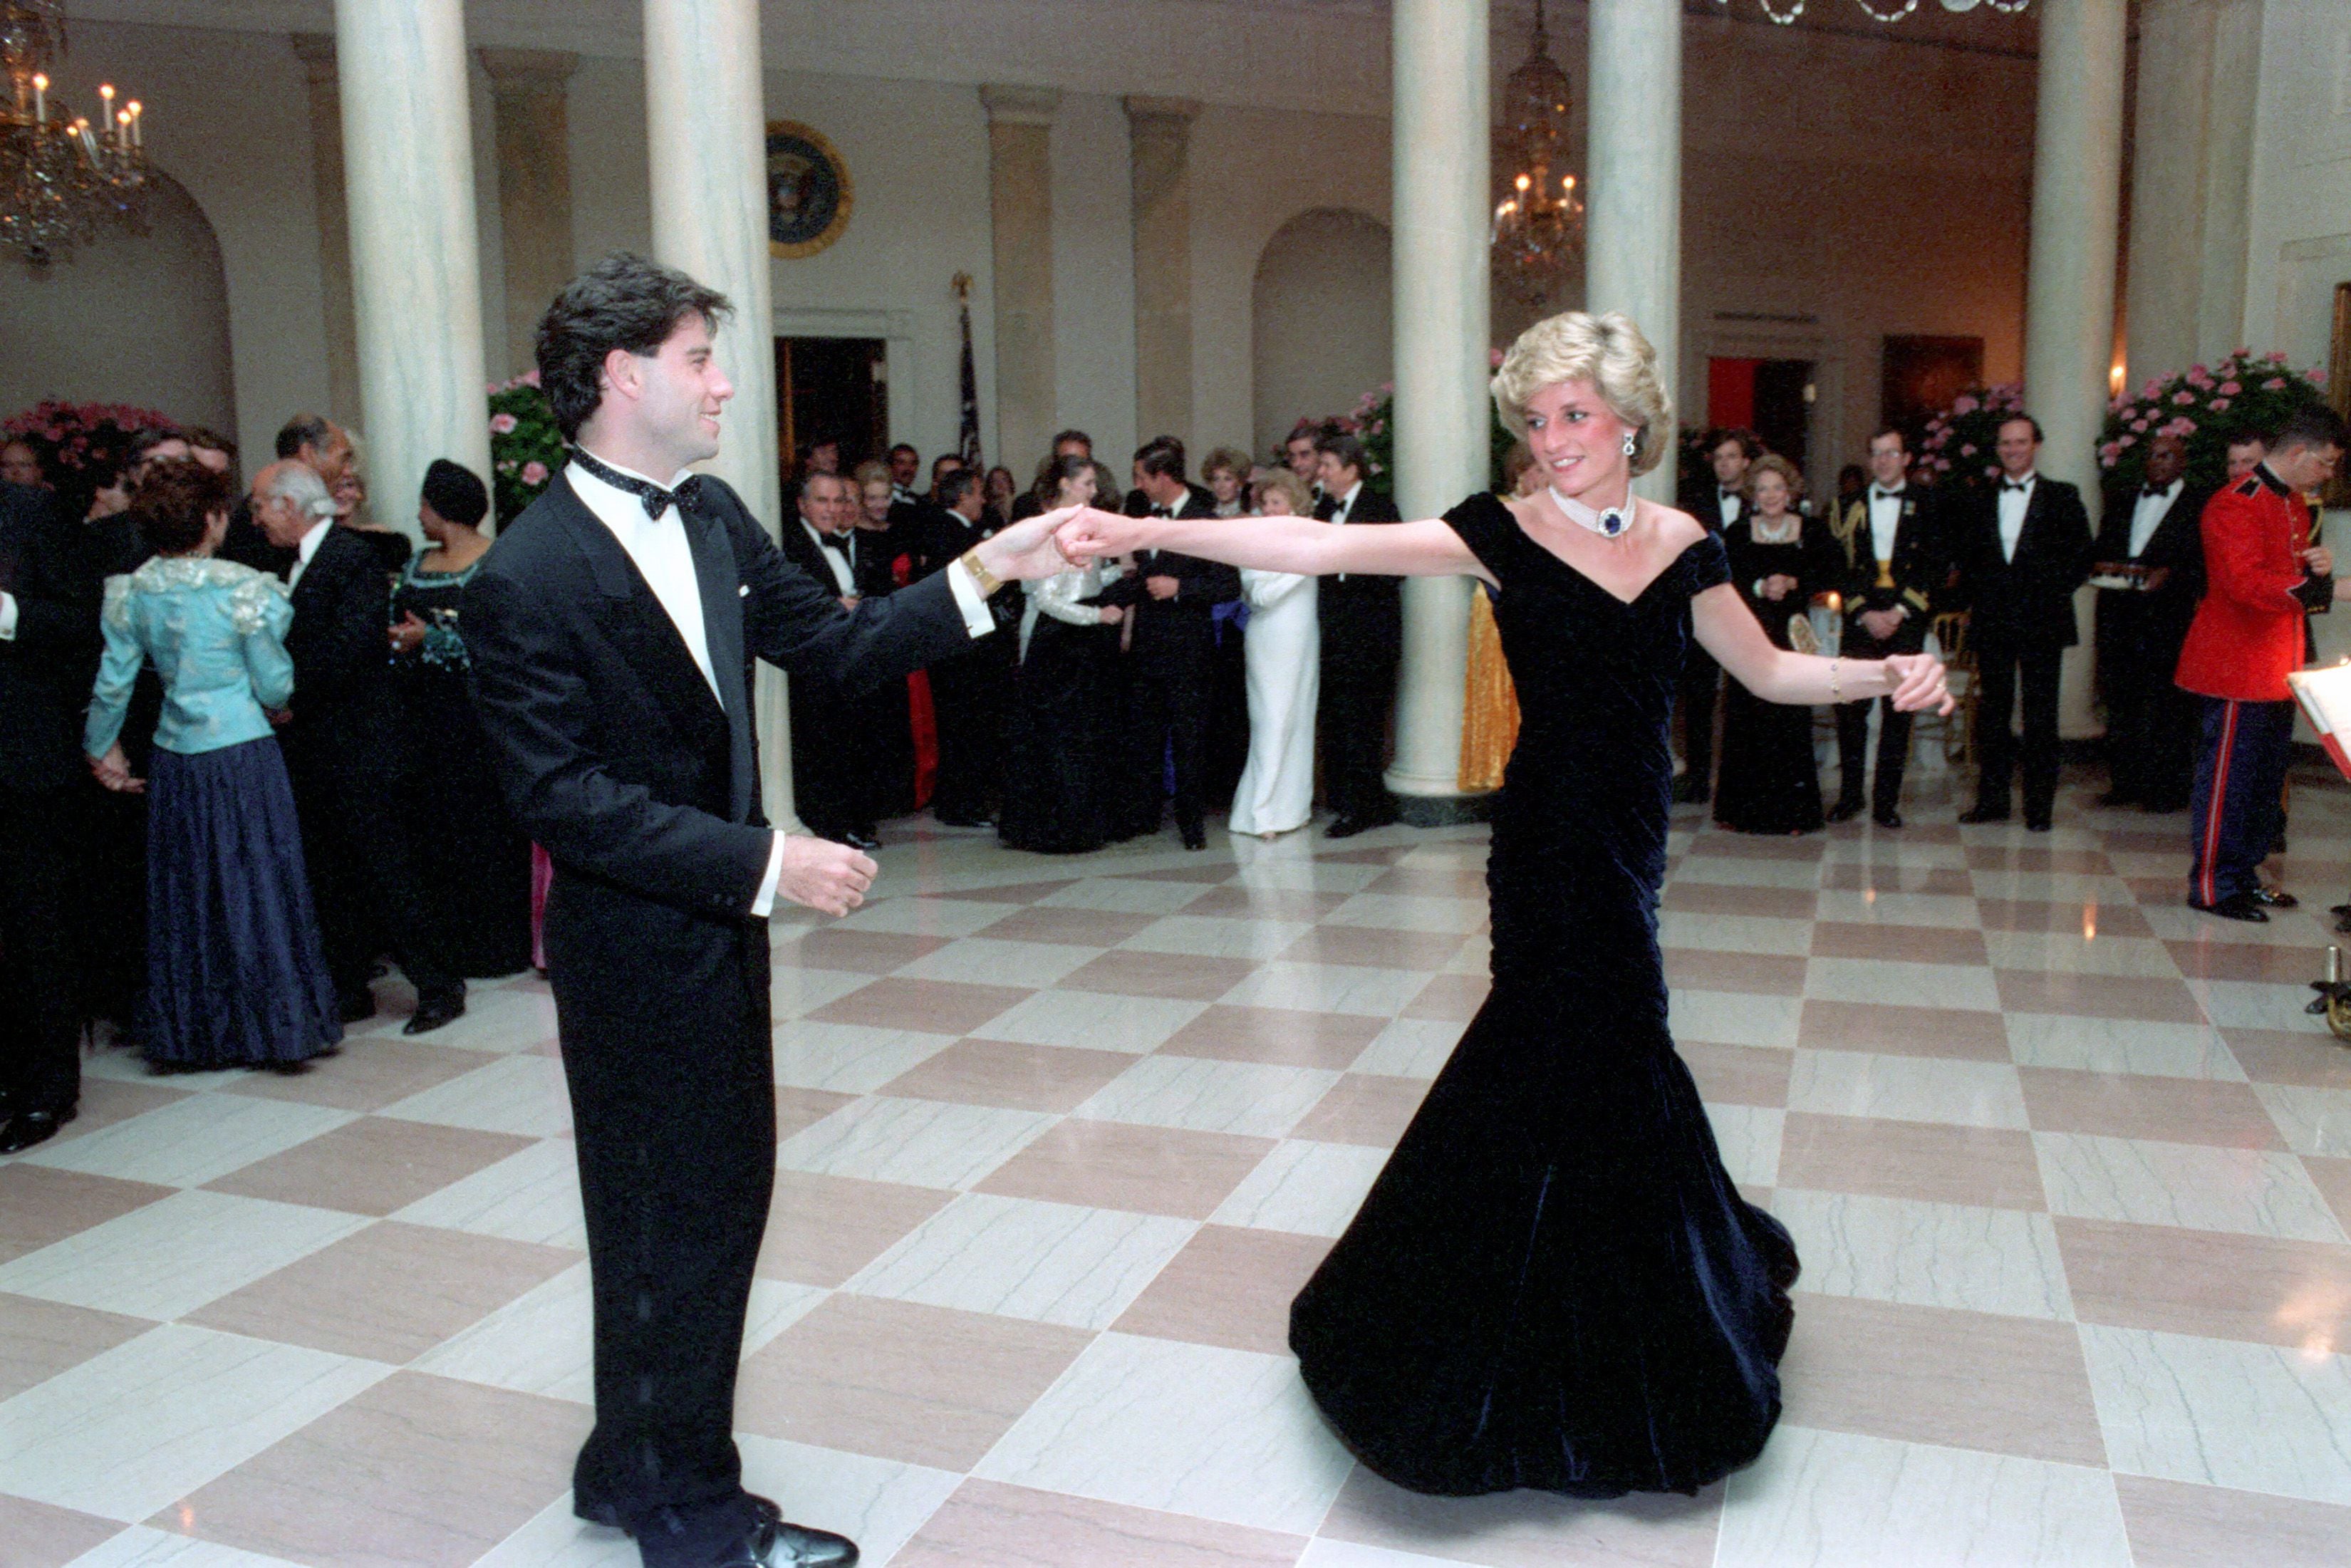 Princess Diana dancing with John Travolta at a White House dinner in 1985. The “Travolta Dress”, as it’s now know, recently went on display at Kensington Palace. Designed by Victor Edelstein, the midnight blue velvet dress featured off-the-shoulder straps, a floor-sweeping velvet skirt, a decorative bow and layers of tulle petticoats. The dress was bought by charity Historic Royal Palaces in December 2019 for£264,000 and has been in a specialist conservation facility since.